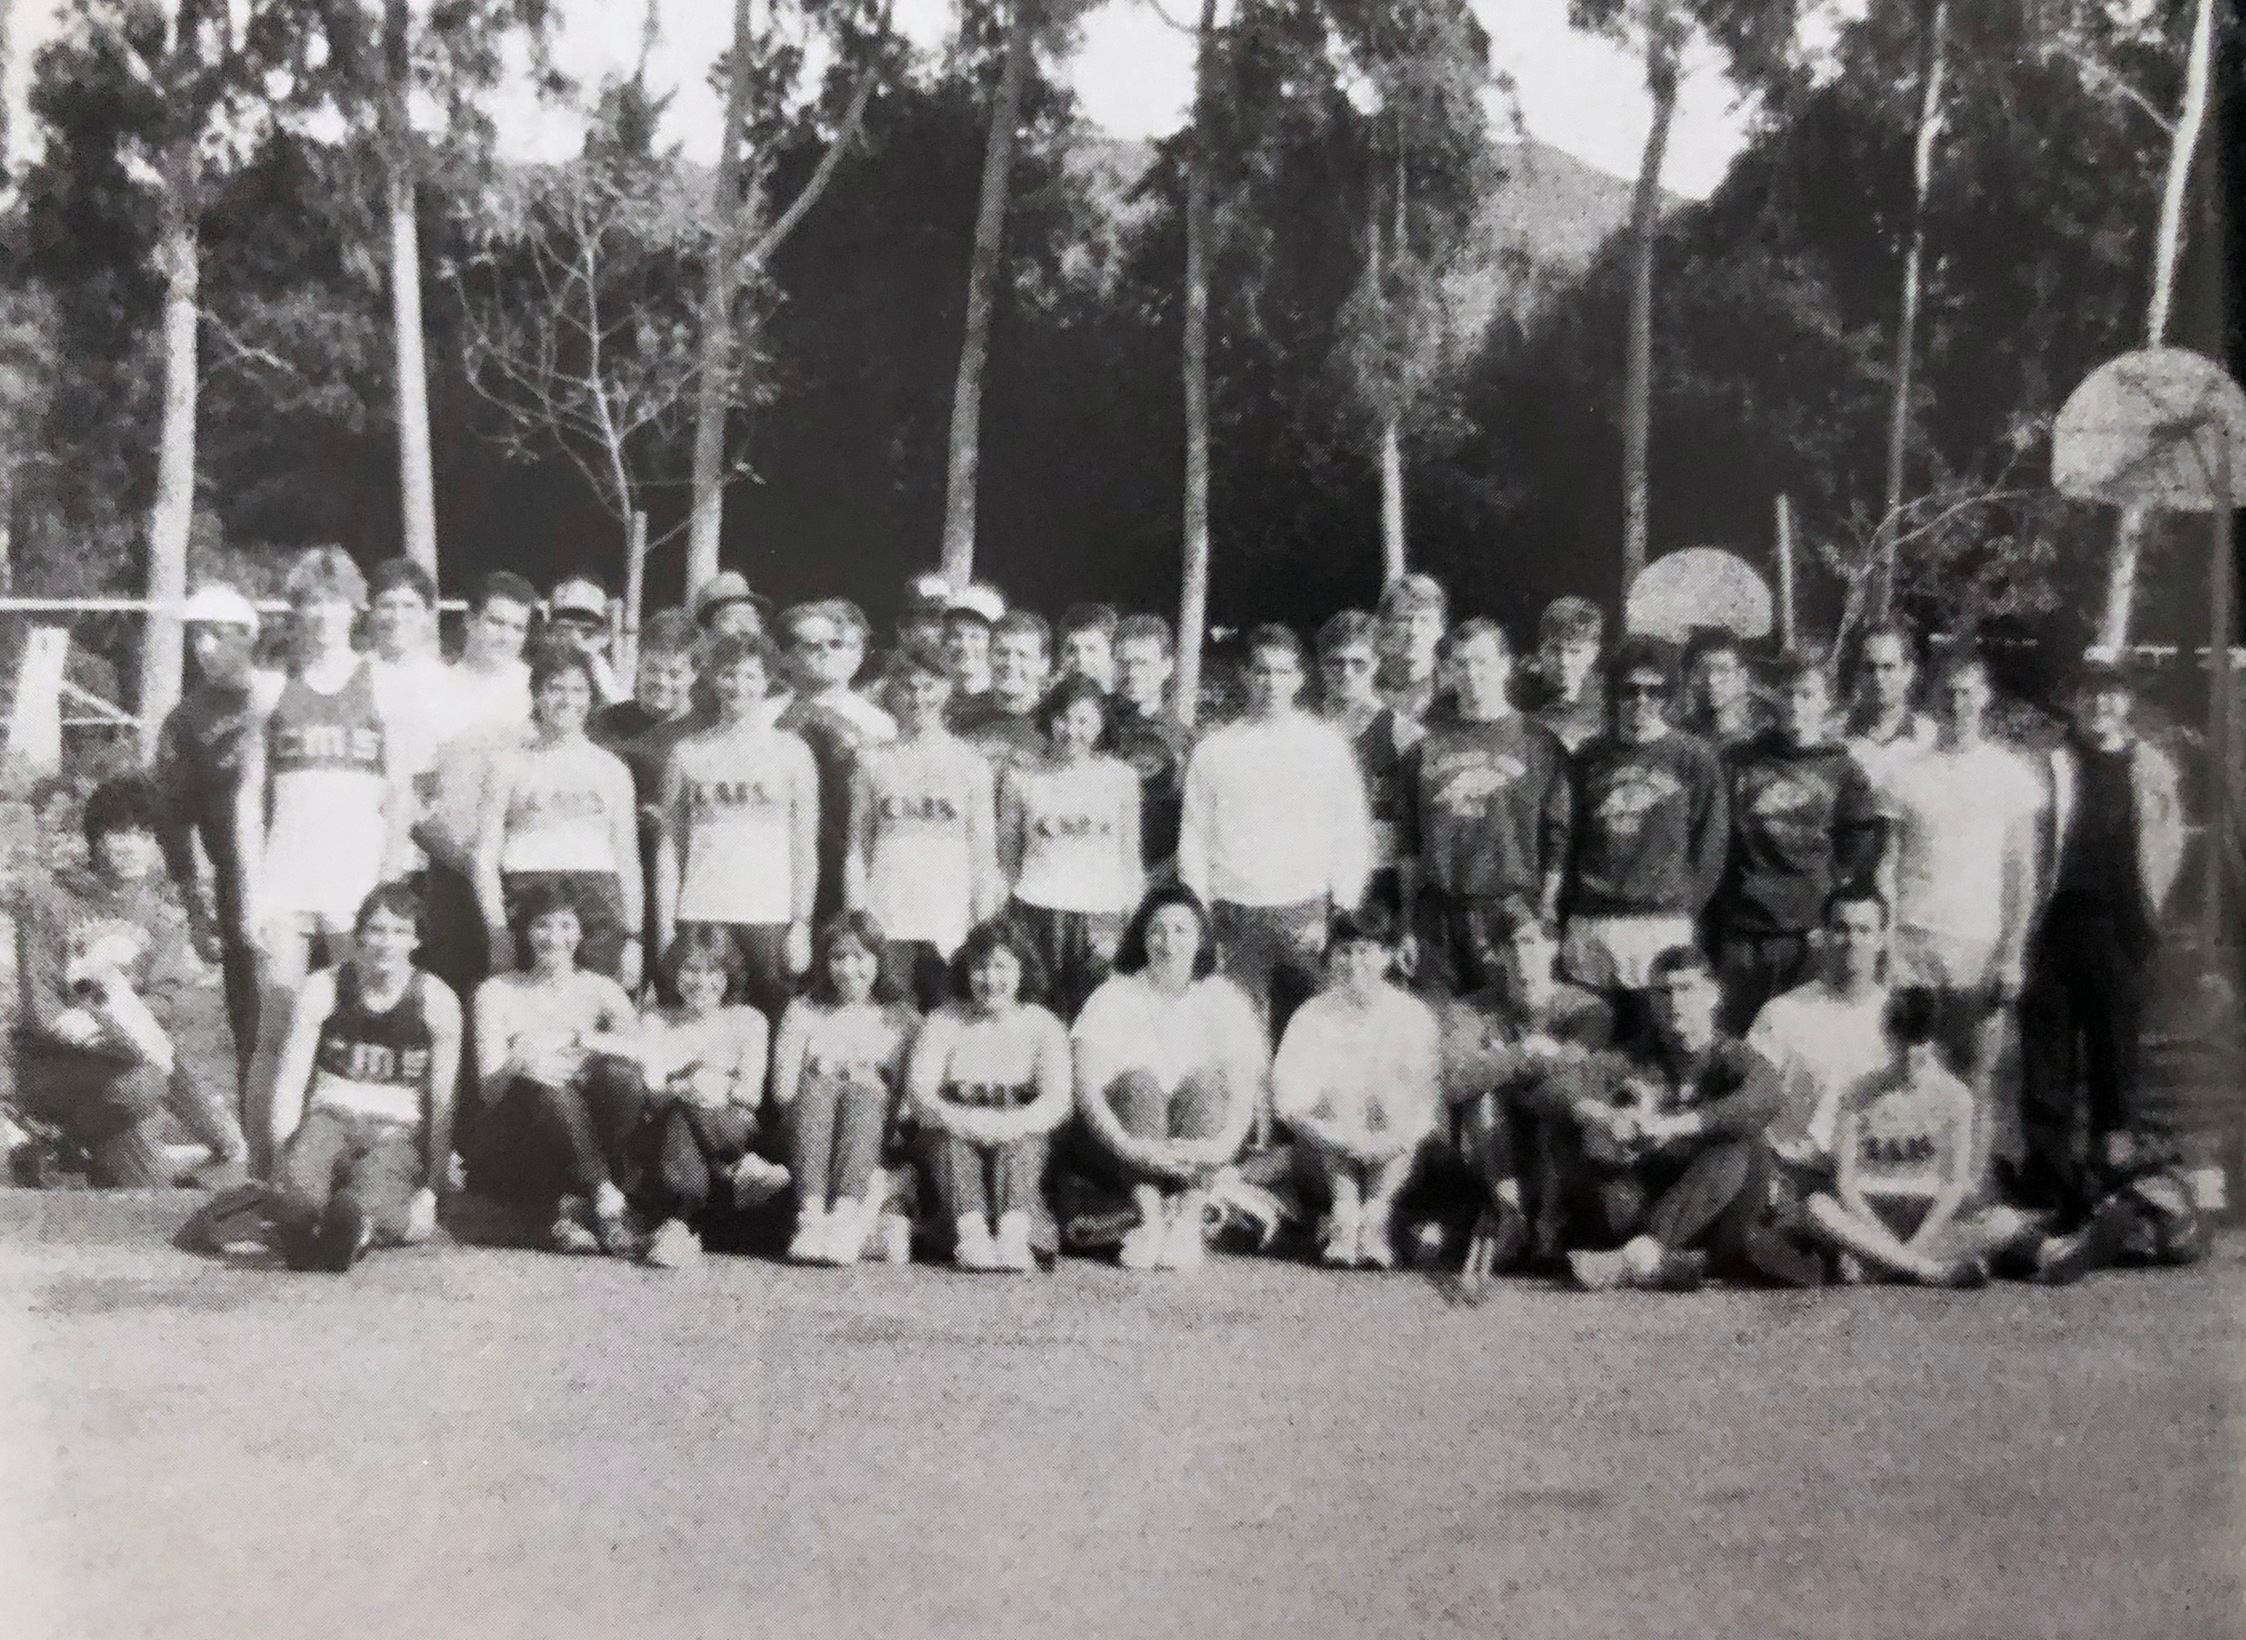 1986 Track and Field team photo